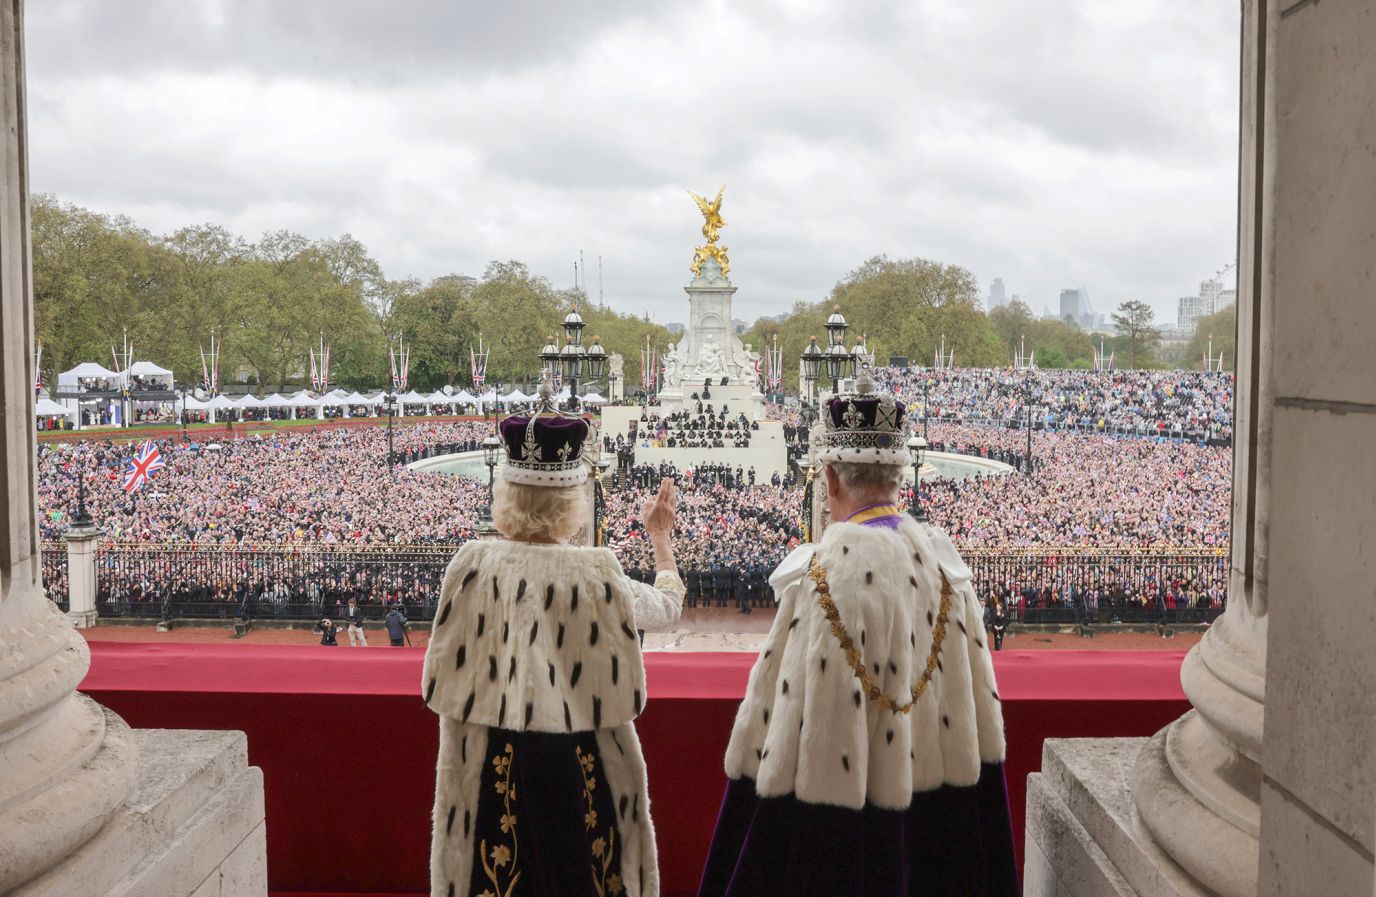 The coronation of King Charles III and Queen Camilla